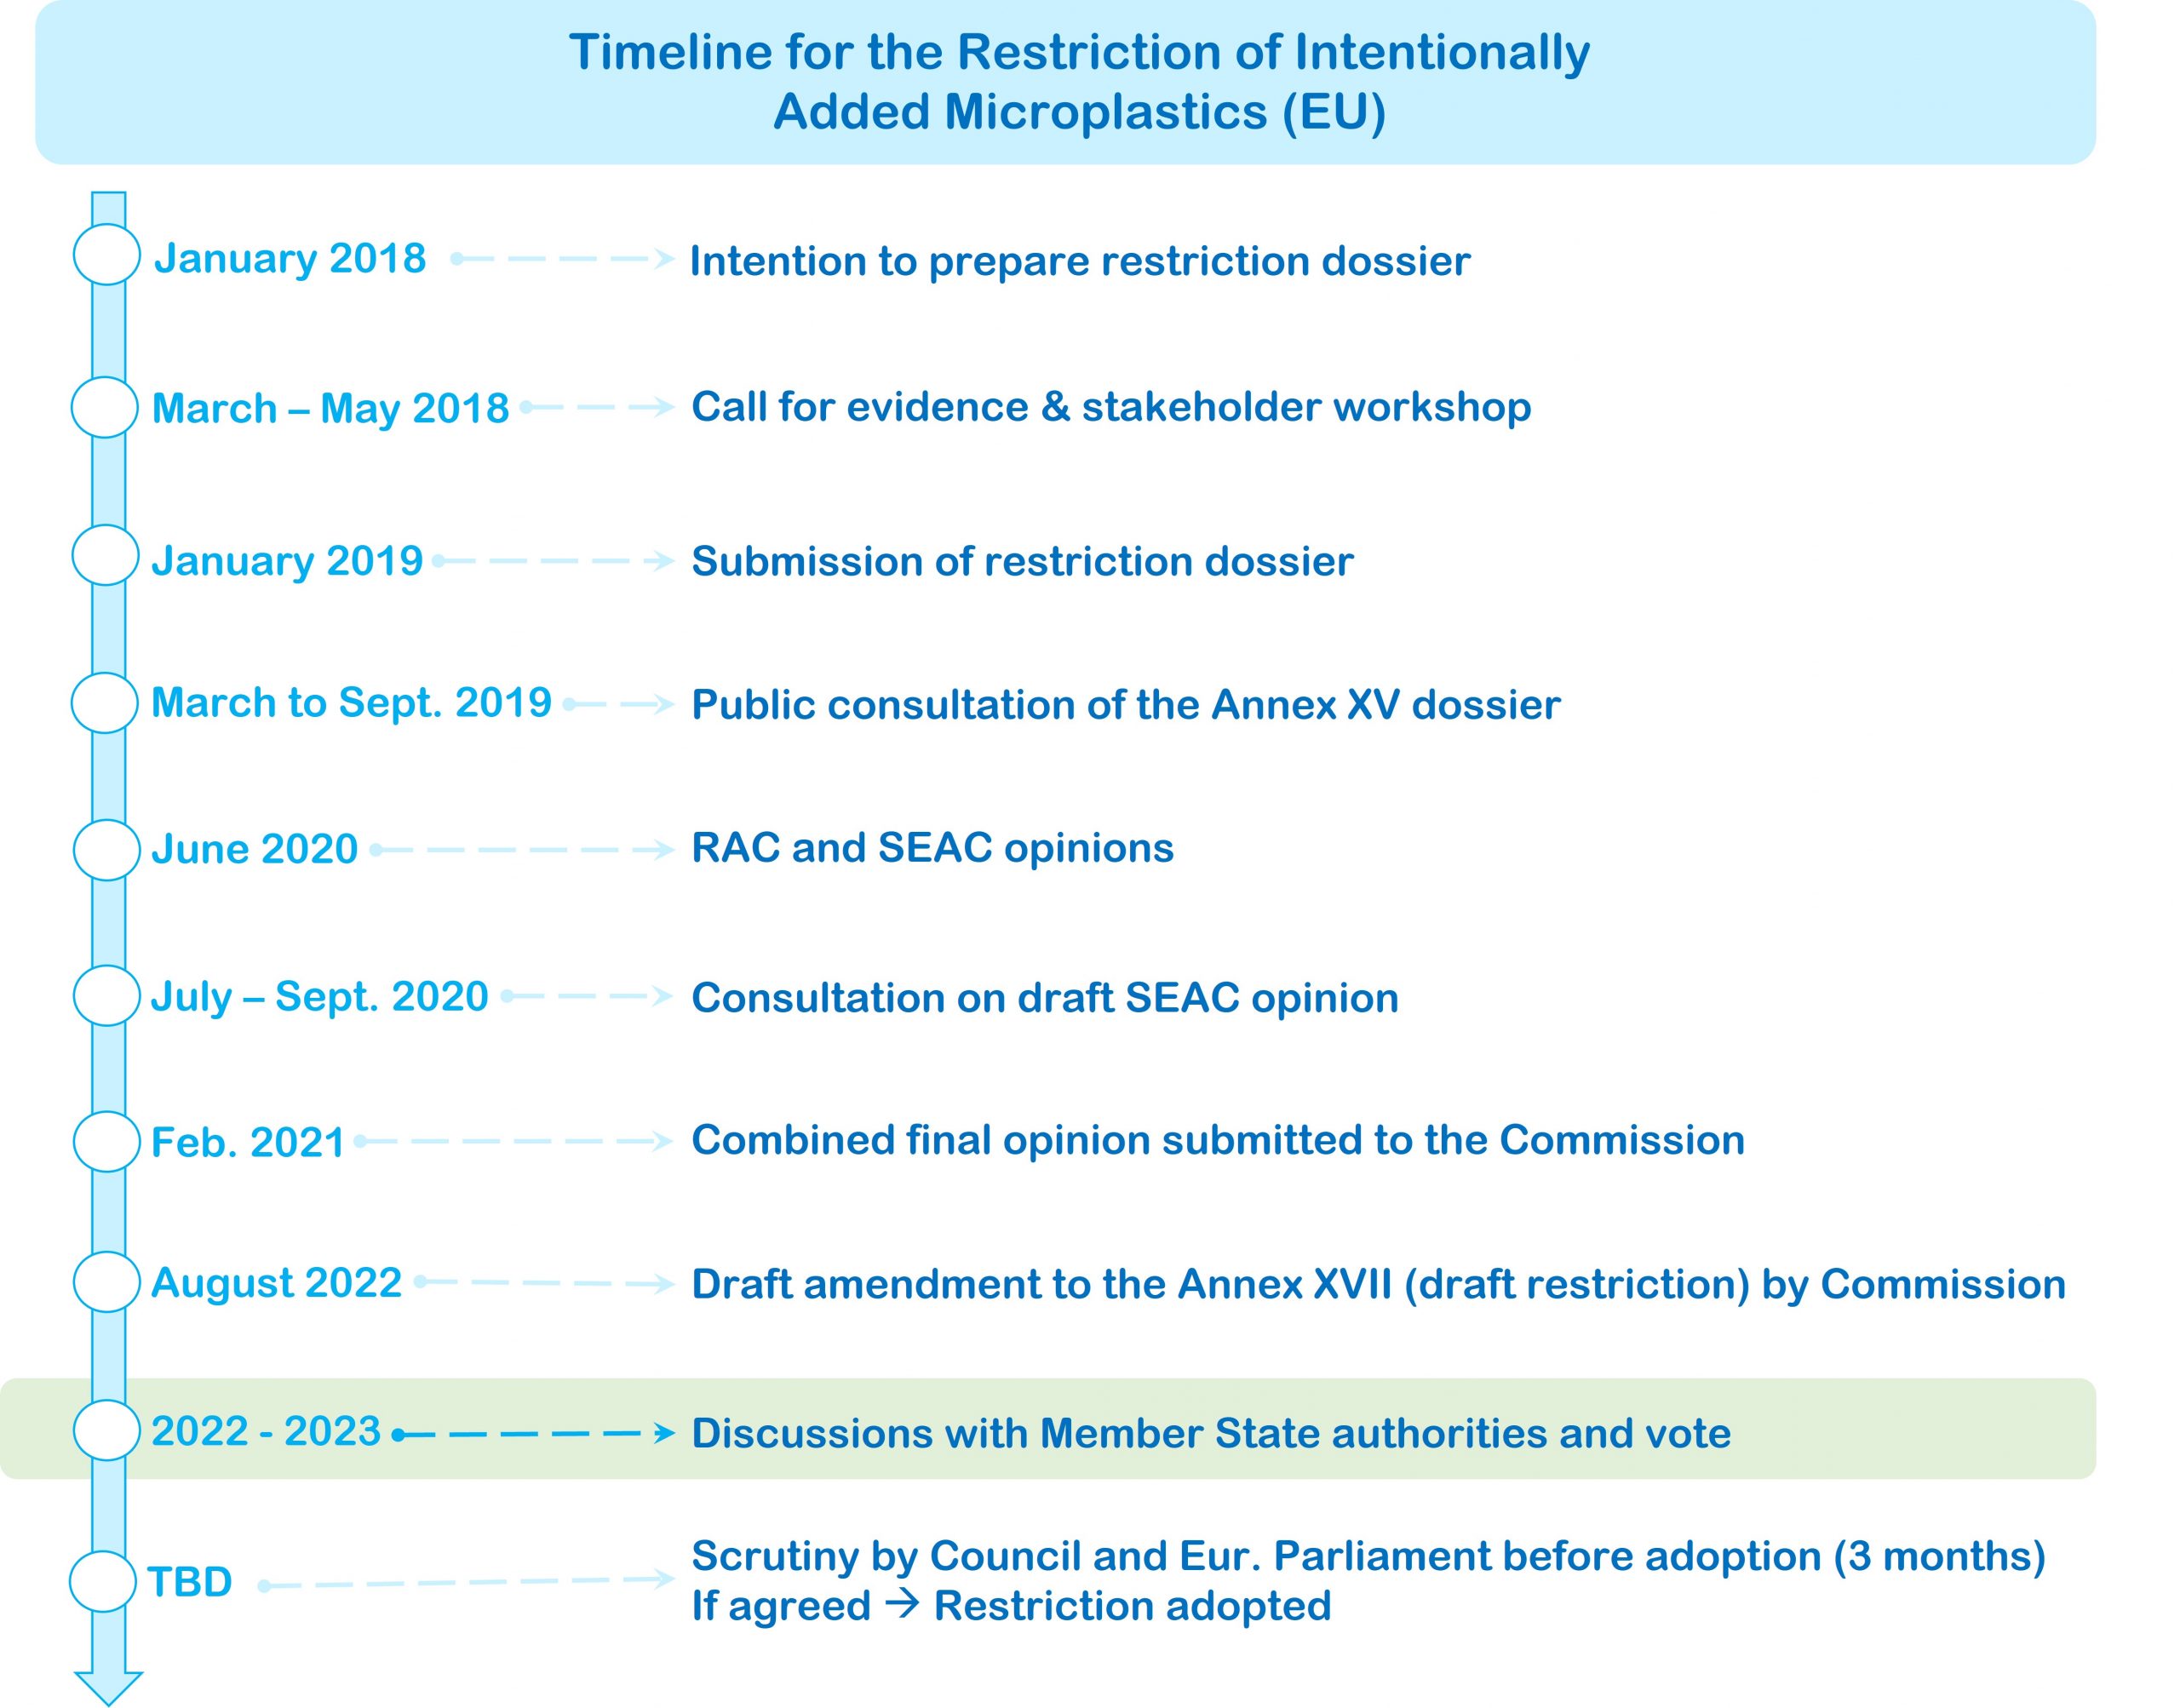 Approximate timeline for the REACH restriction of intentionally added microplastics. 